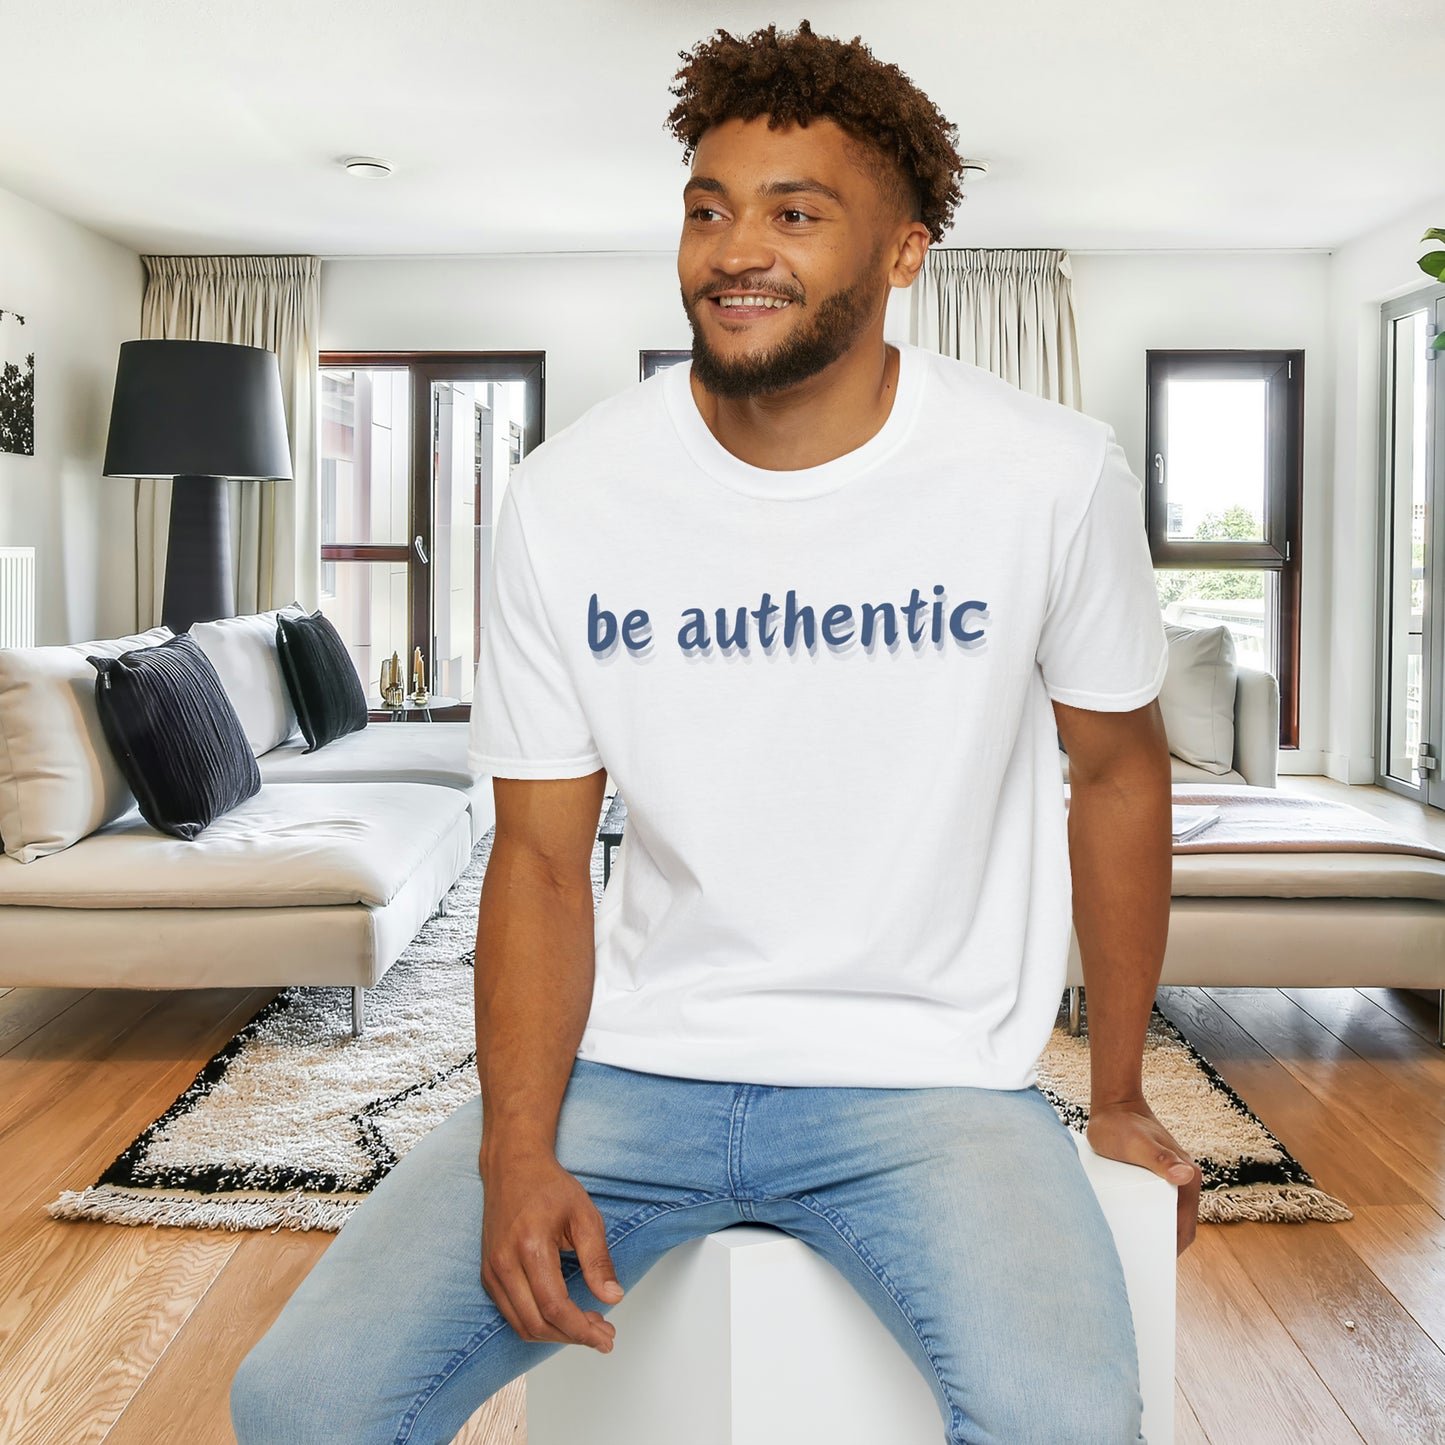 Be authentic is the message of this uniquely designed Unisex Softstyle T-Shirt for you.